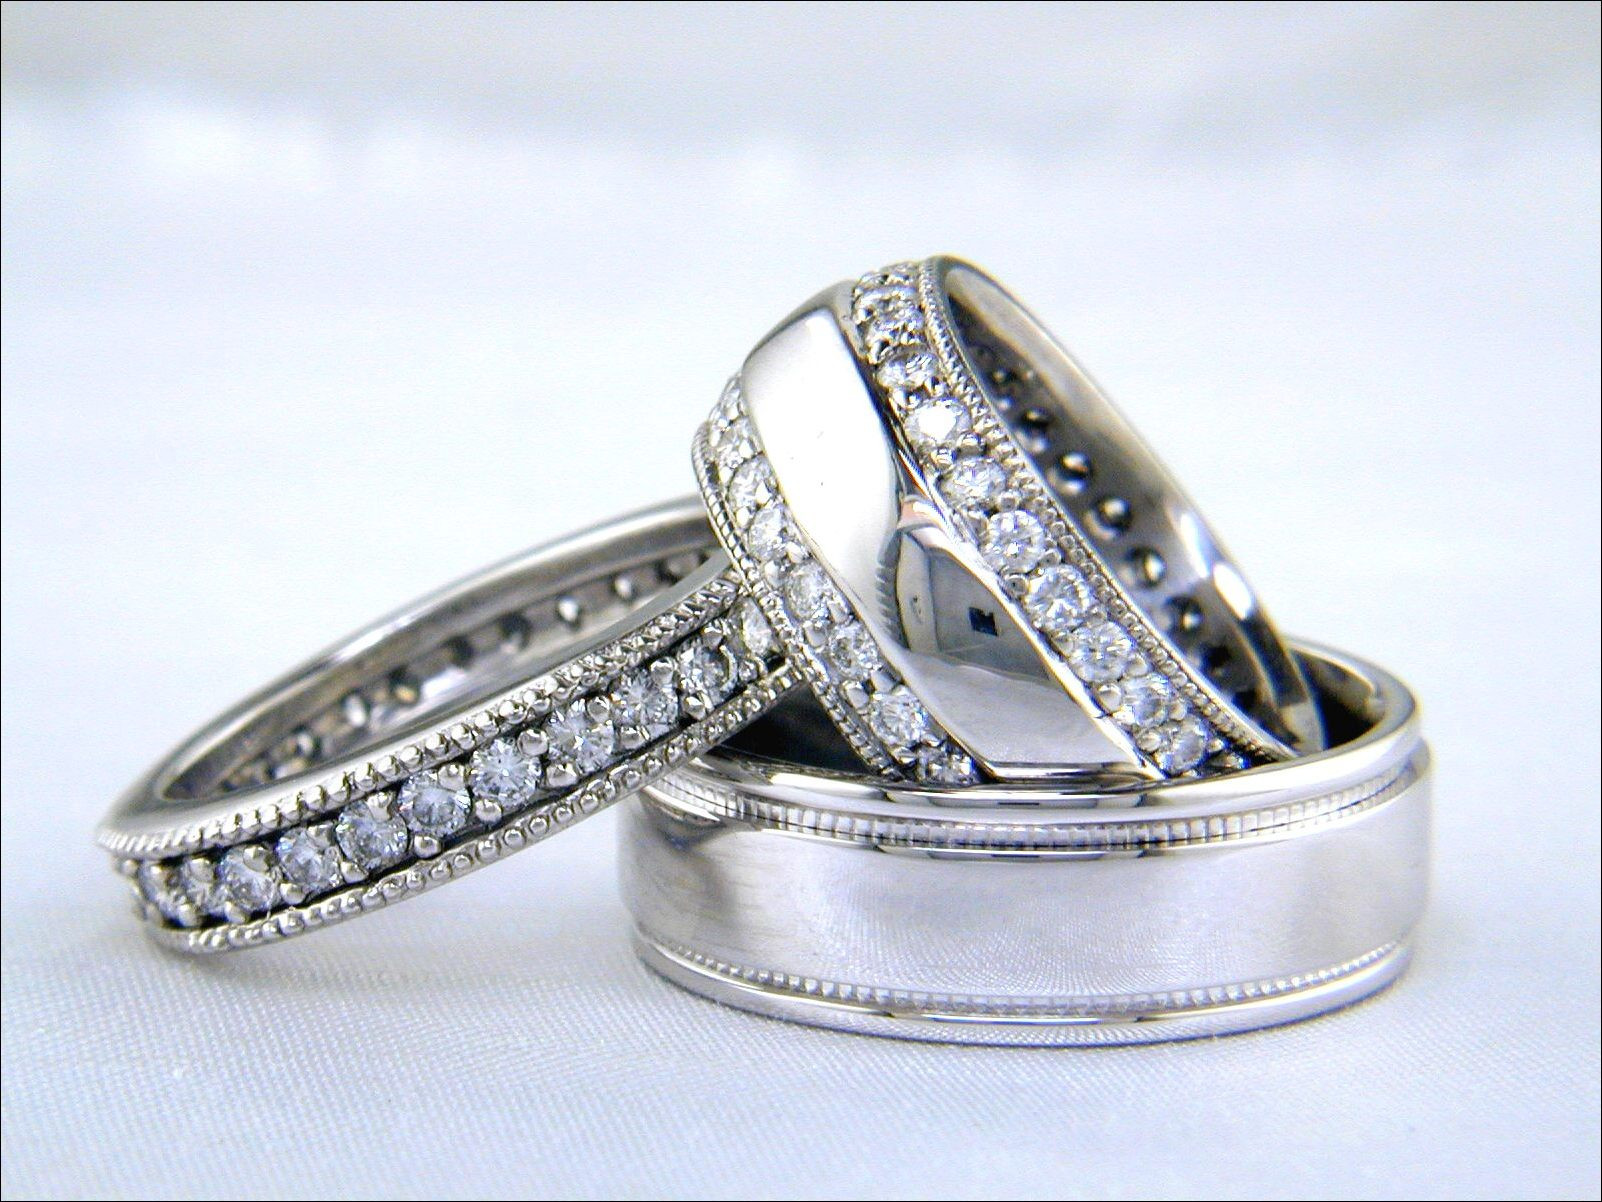 Bride And Groom Wedding Ring Sets
 bride and groom wedding ring sets 21 Best Inspiration